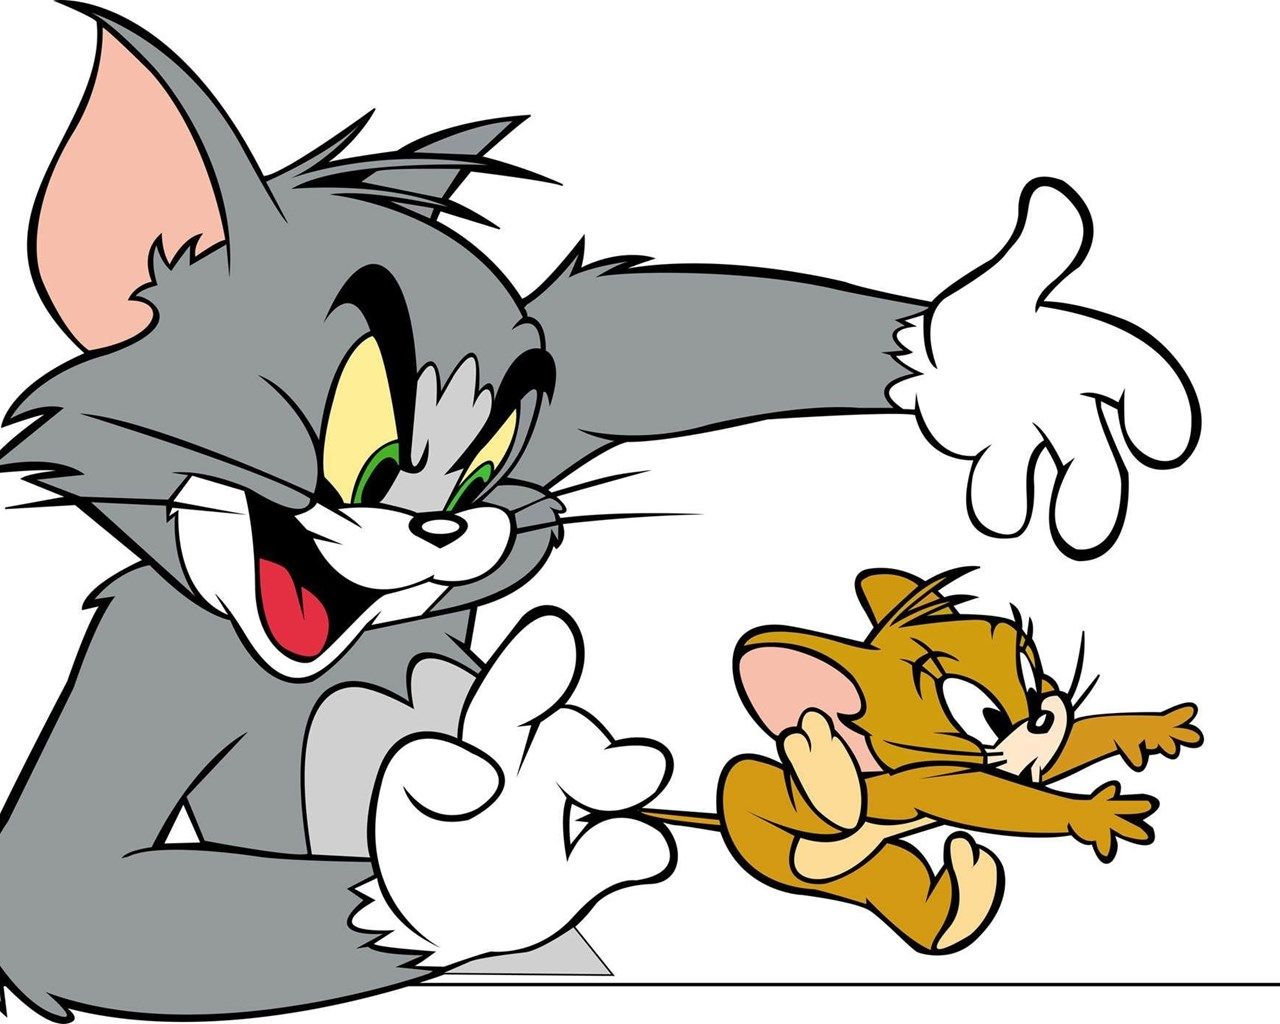 Tom, And, Jerry, Fight, Wallpaper, Hd, For Facebook, Share Wallpaper Desktop Background